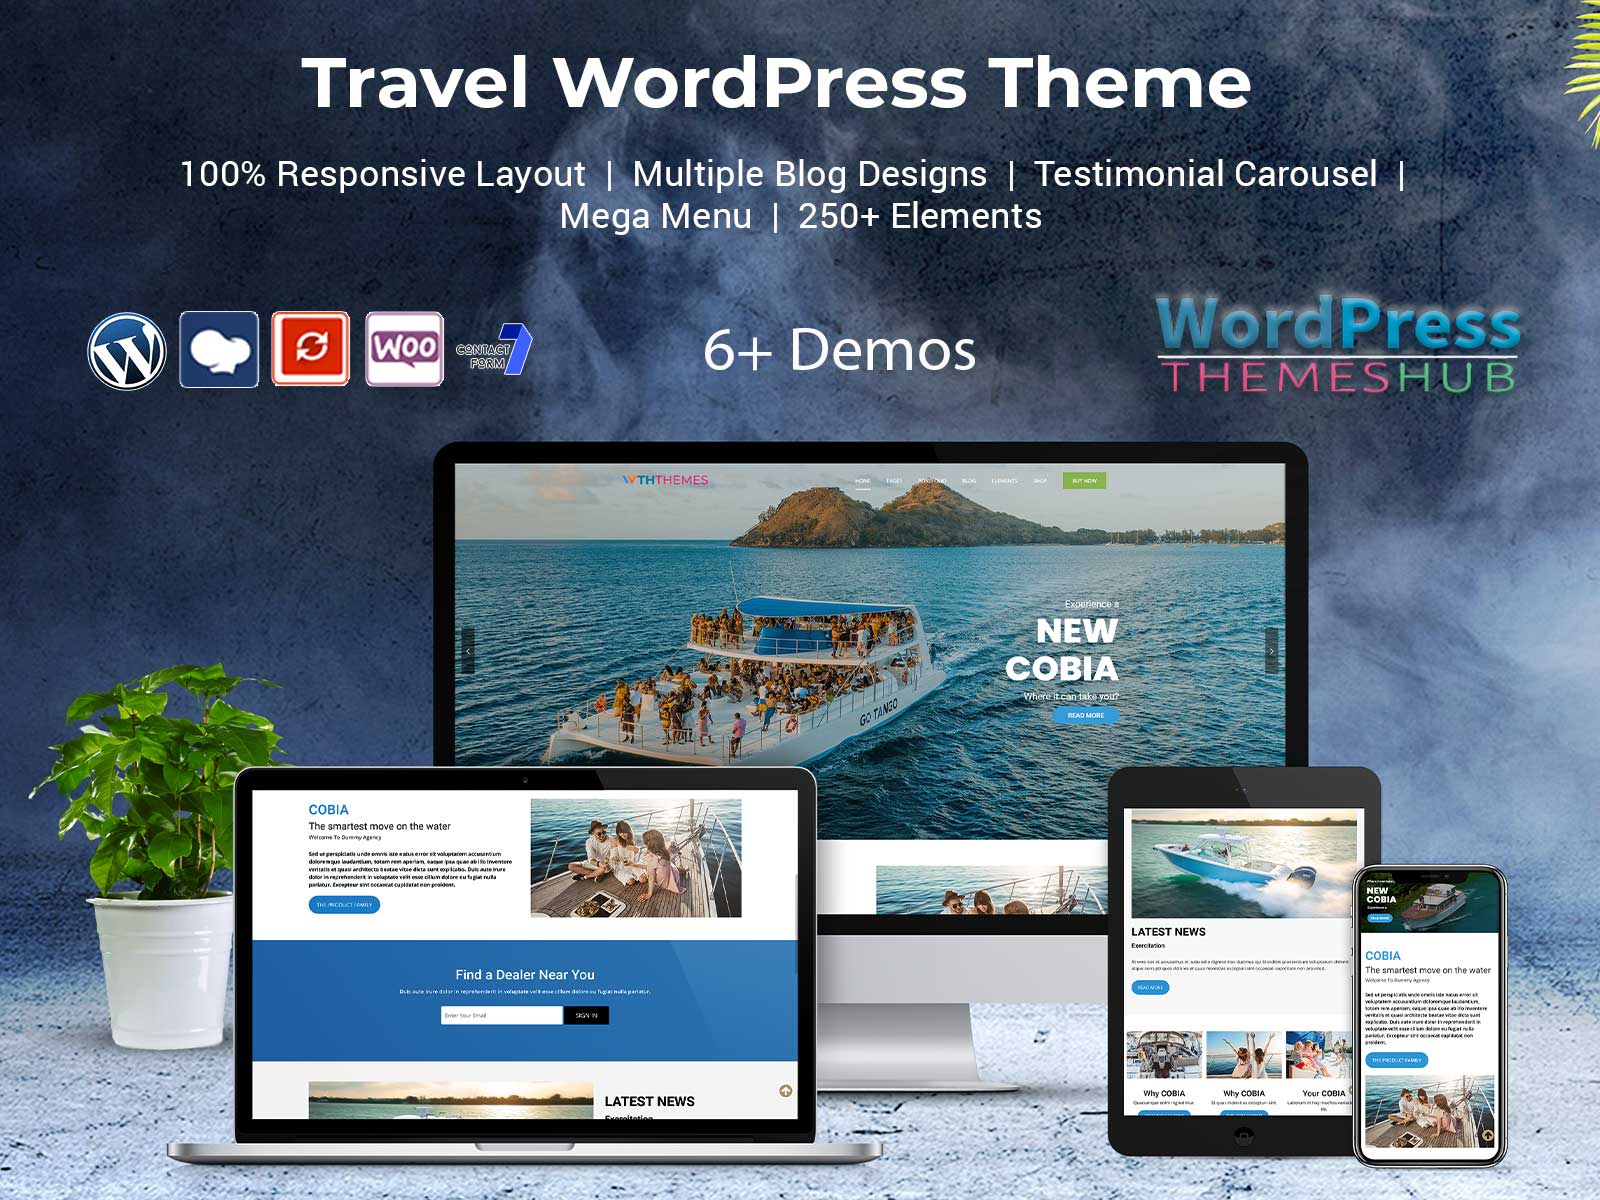 Travel WordPress Theme For Travel Blogs And Hotels